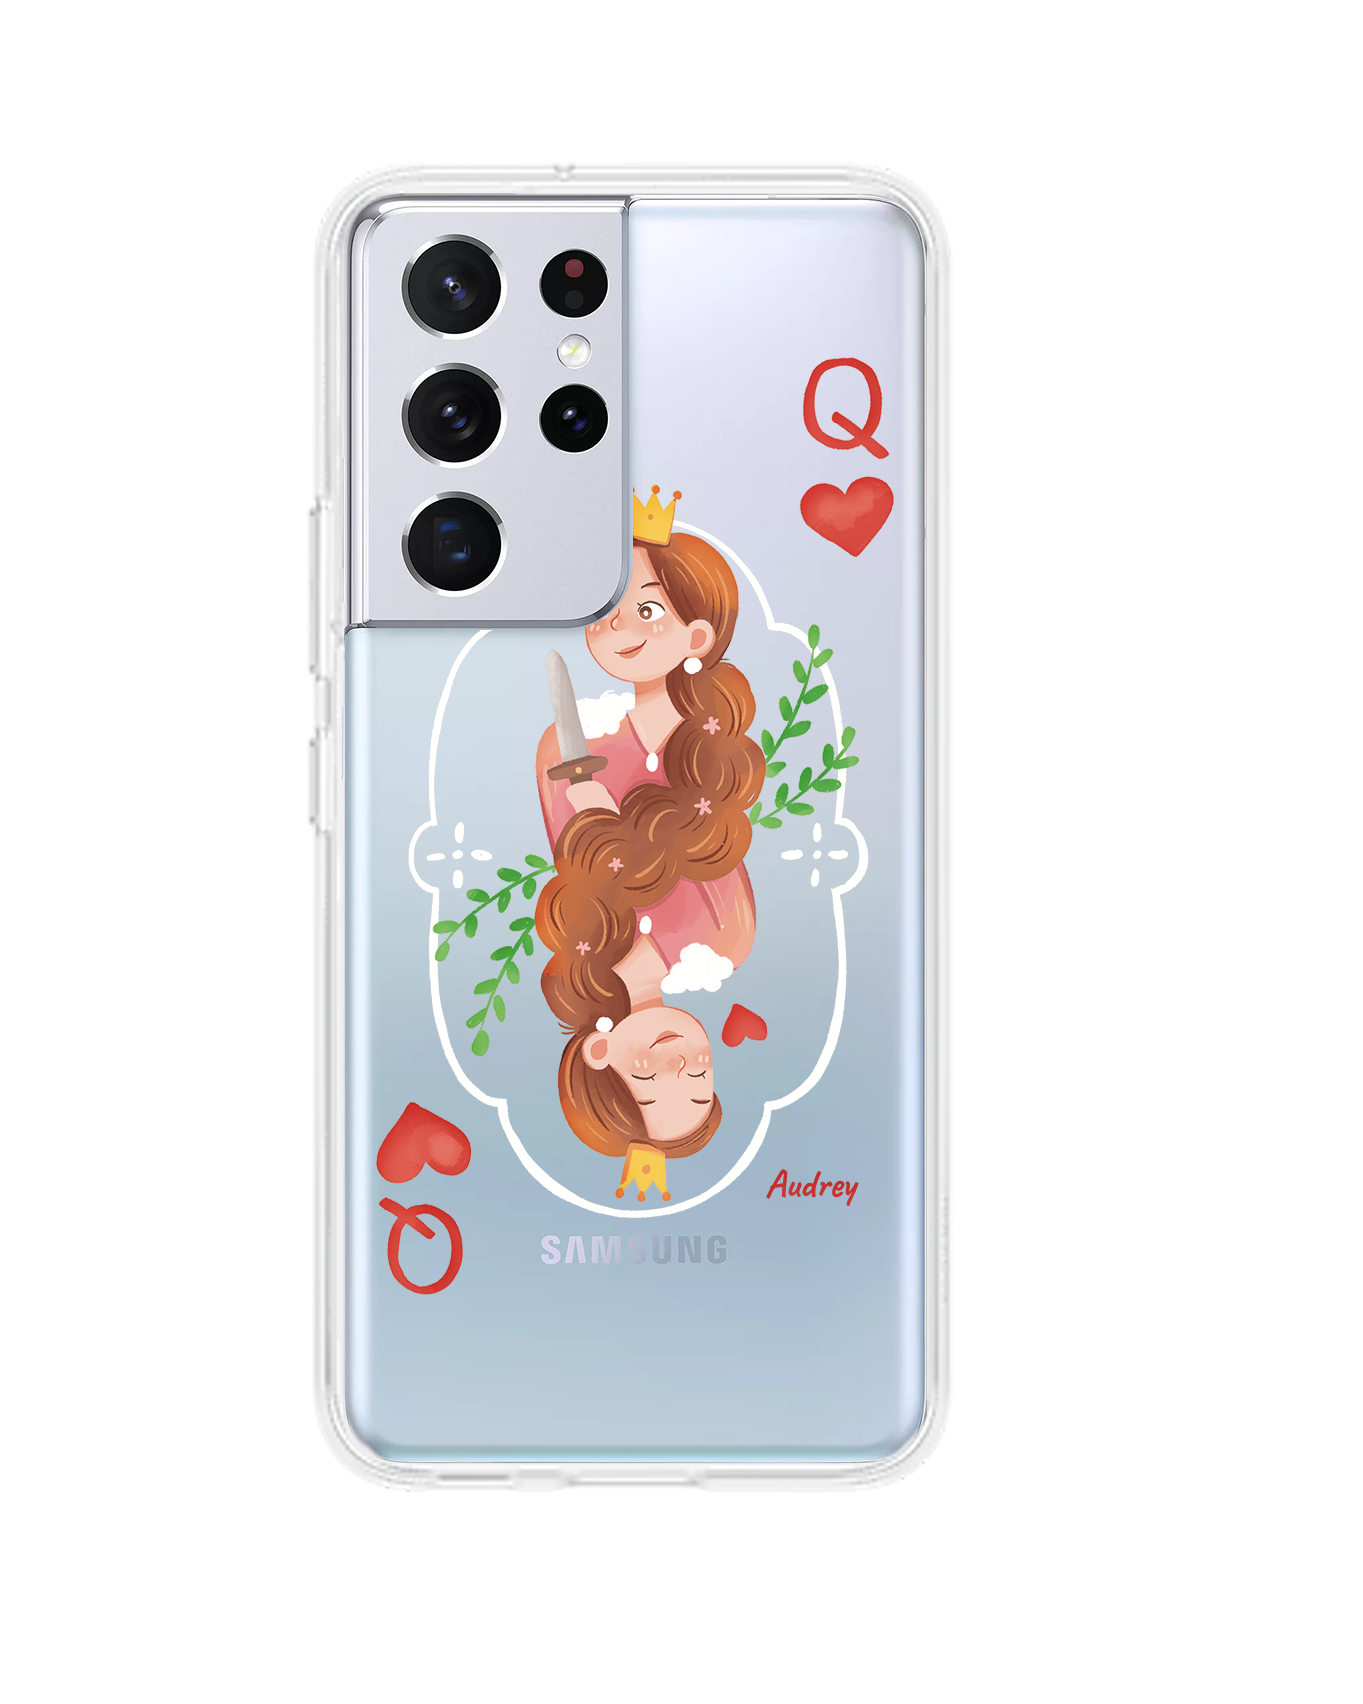 Android Rearguard Hybrid Case - Queen (Couple Case)